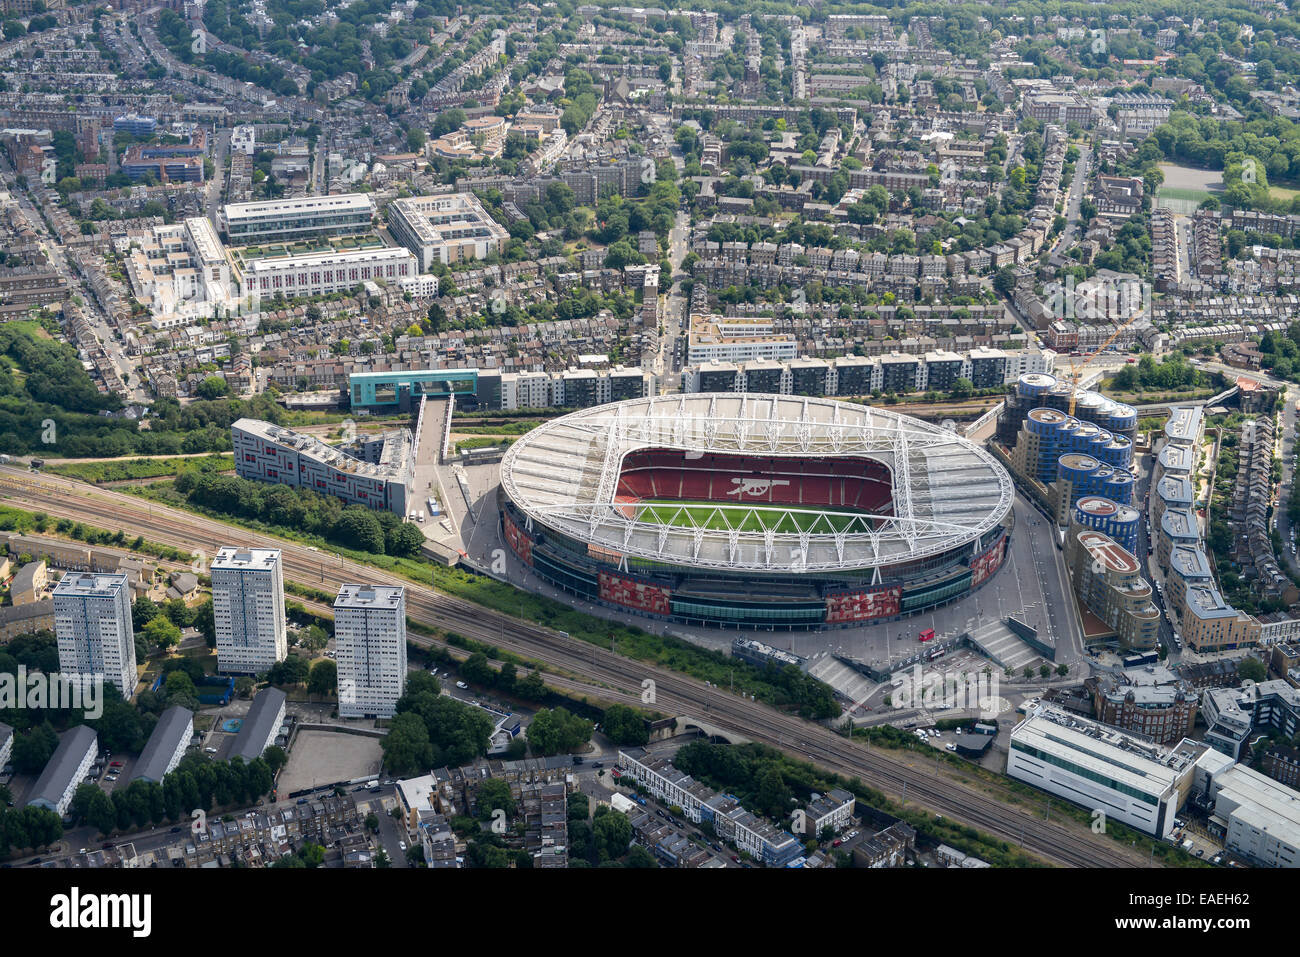 An aerial view of the Emirates Stadium, home of Arsenal FC. Their former home, Highbury is visible in the background Stock Photo